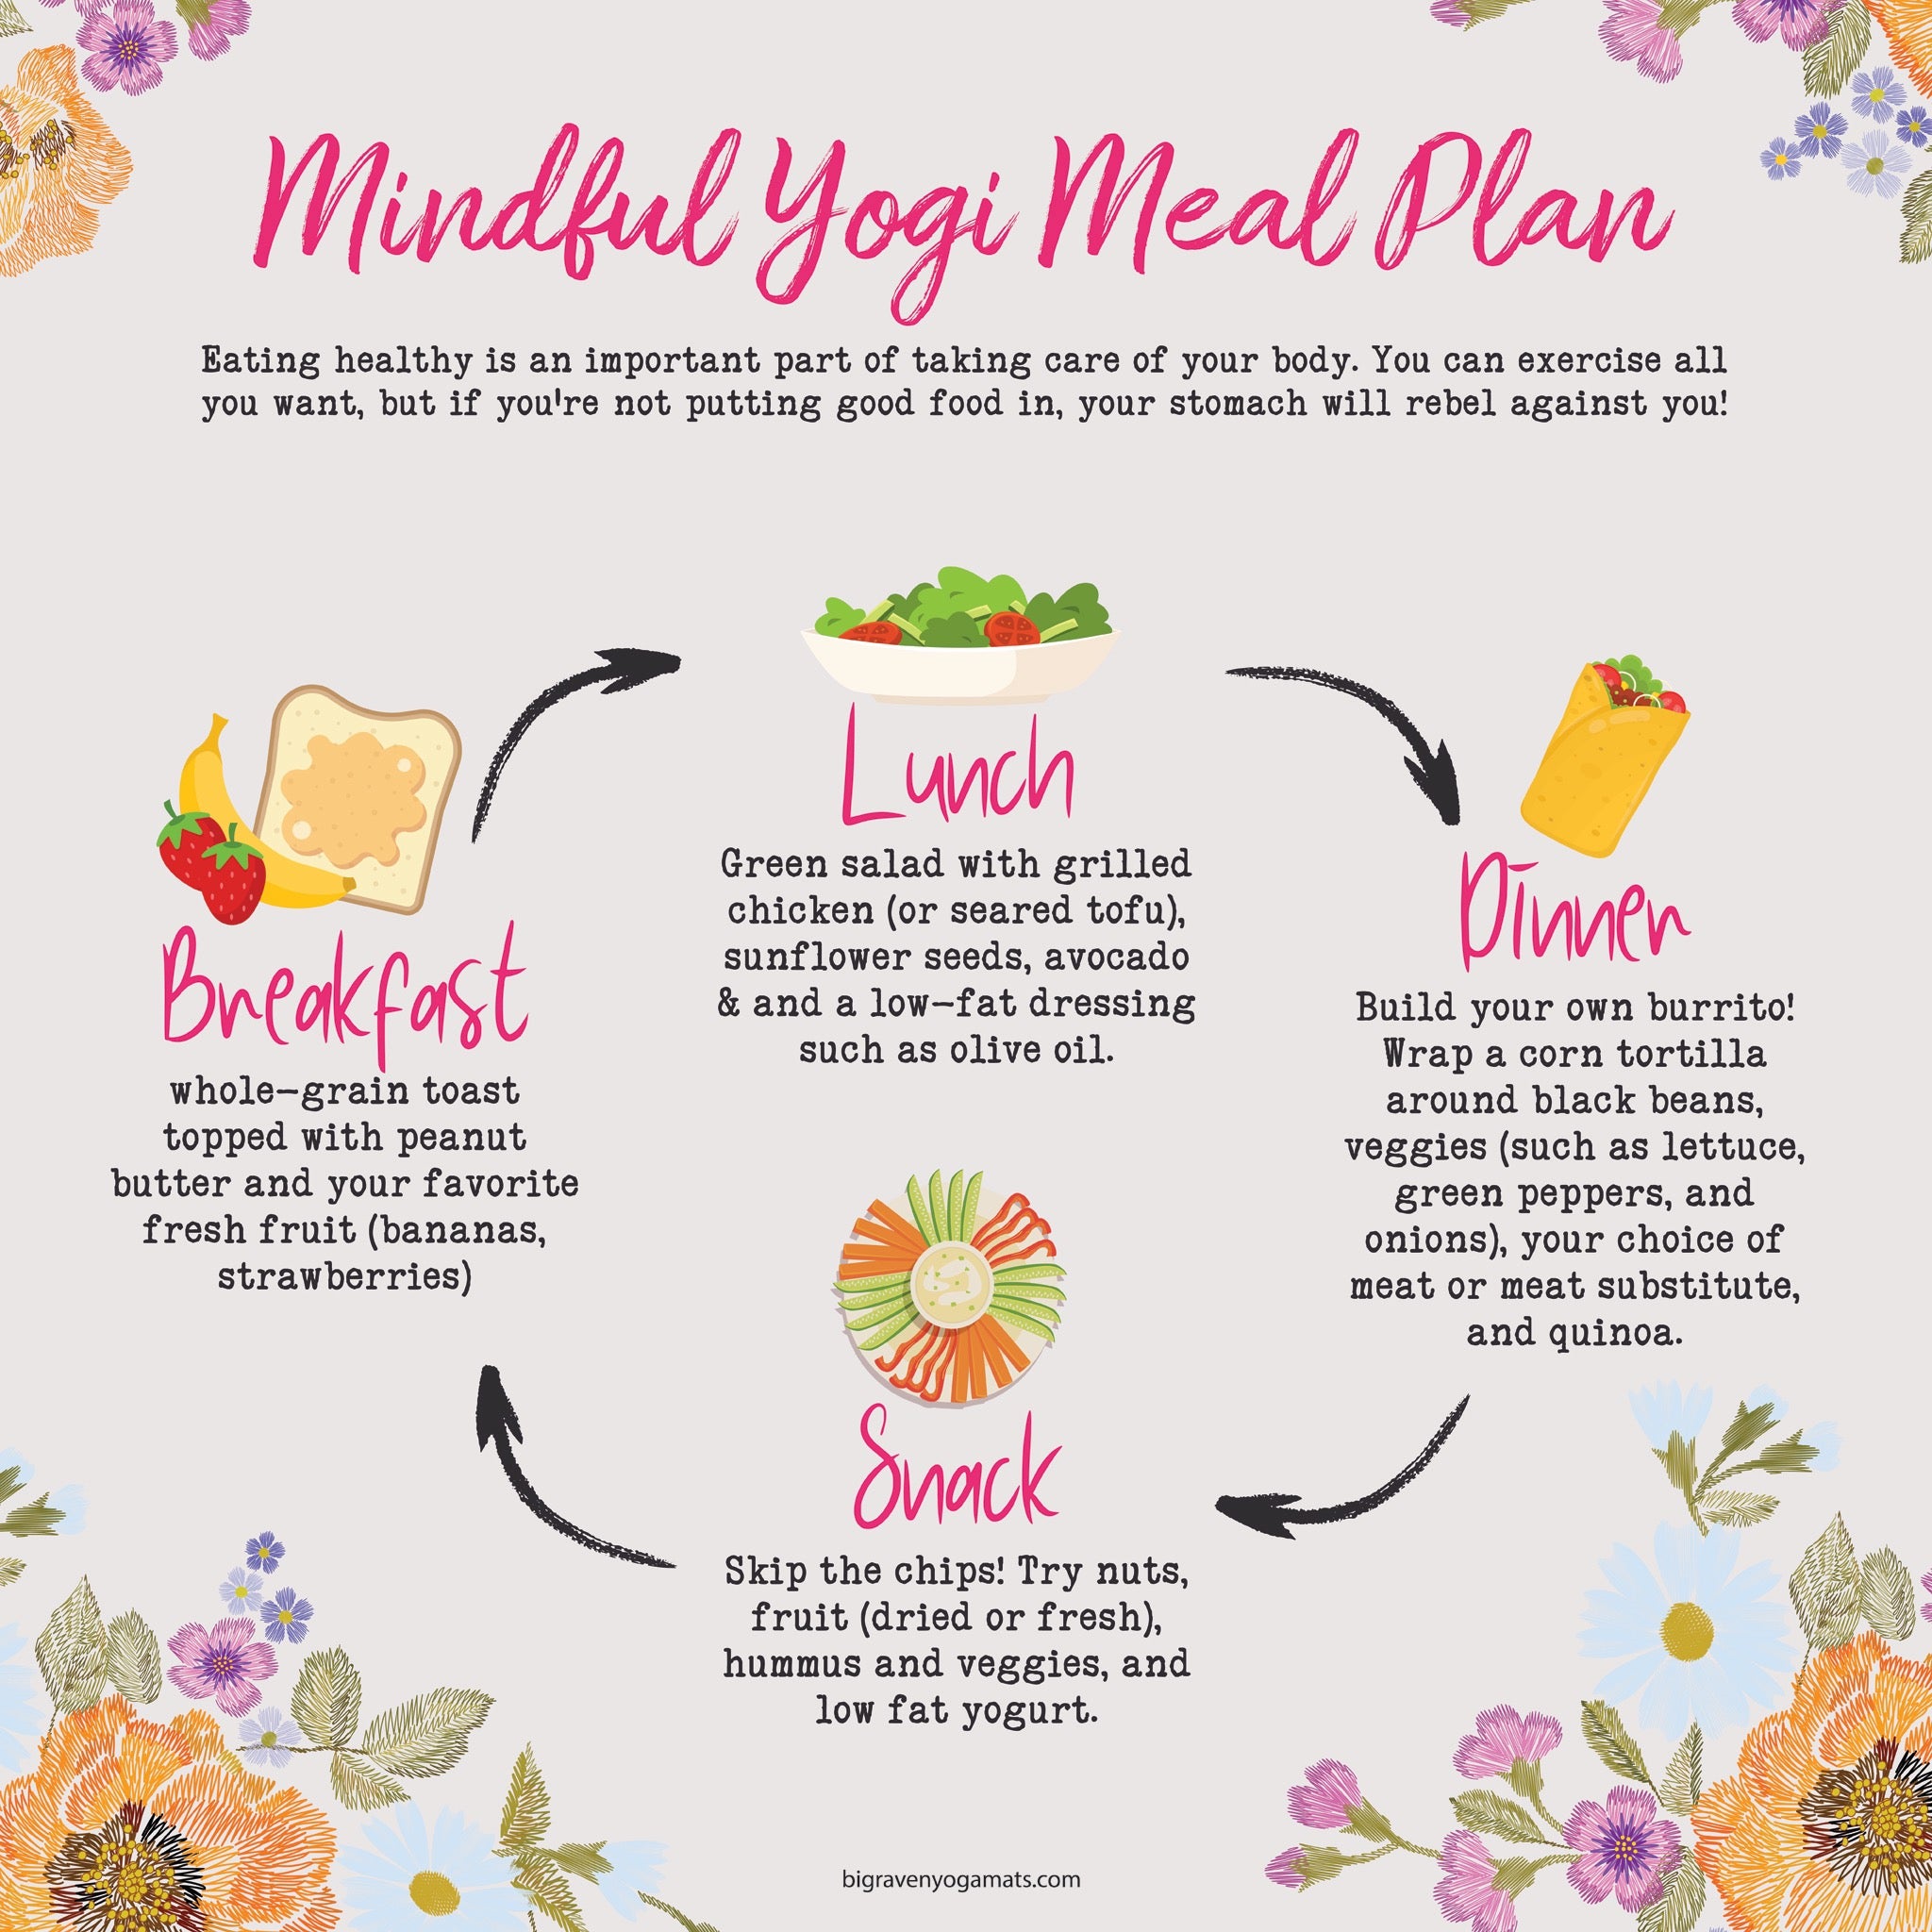 Mindful eating and mindful meal planning